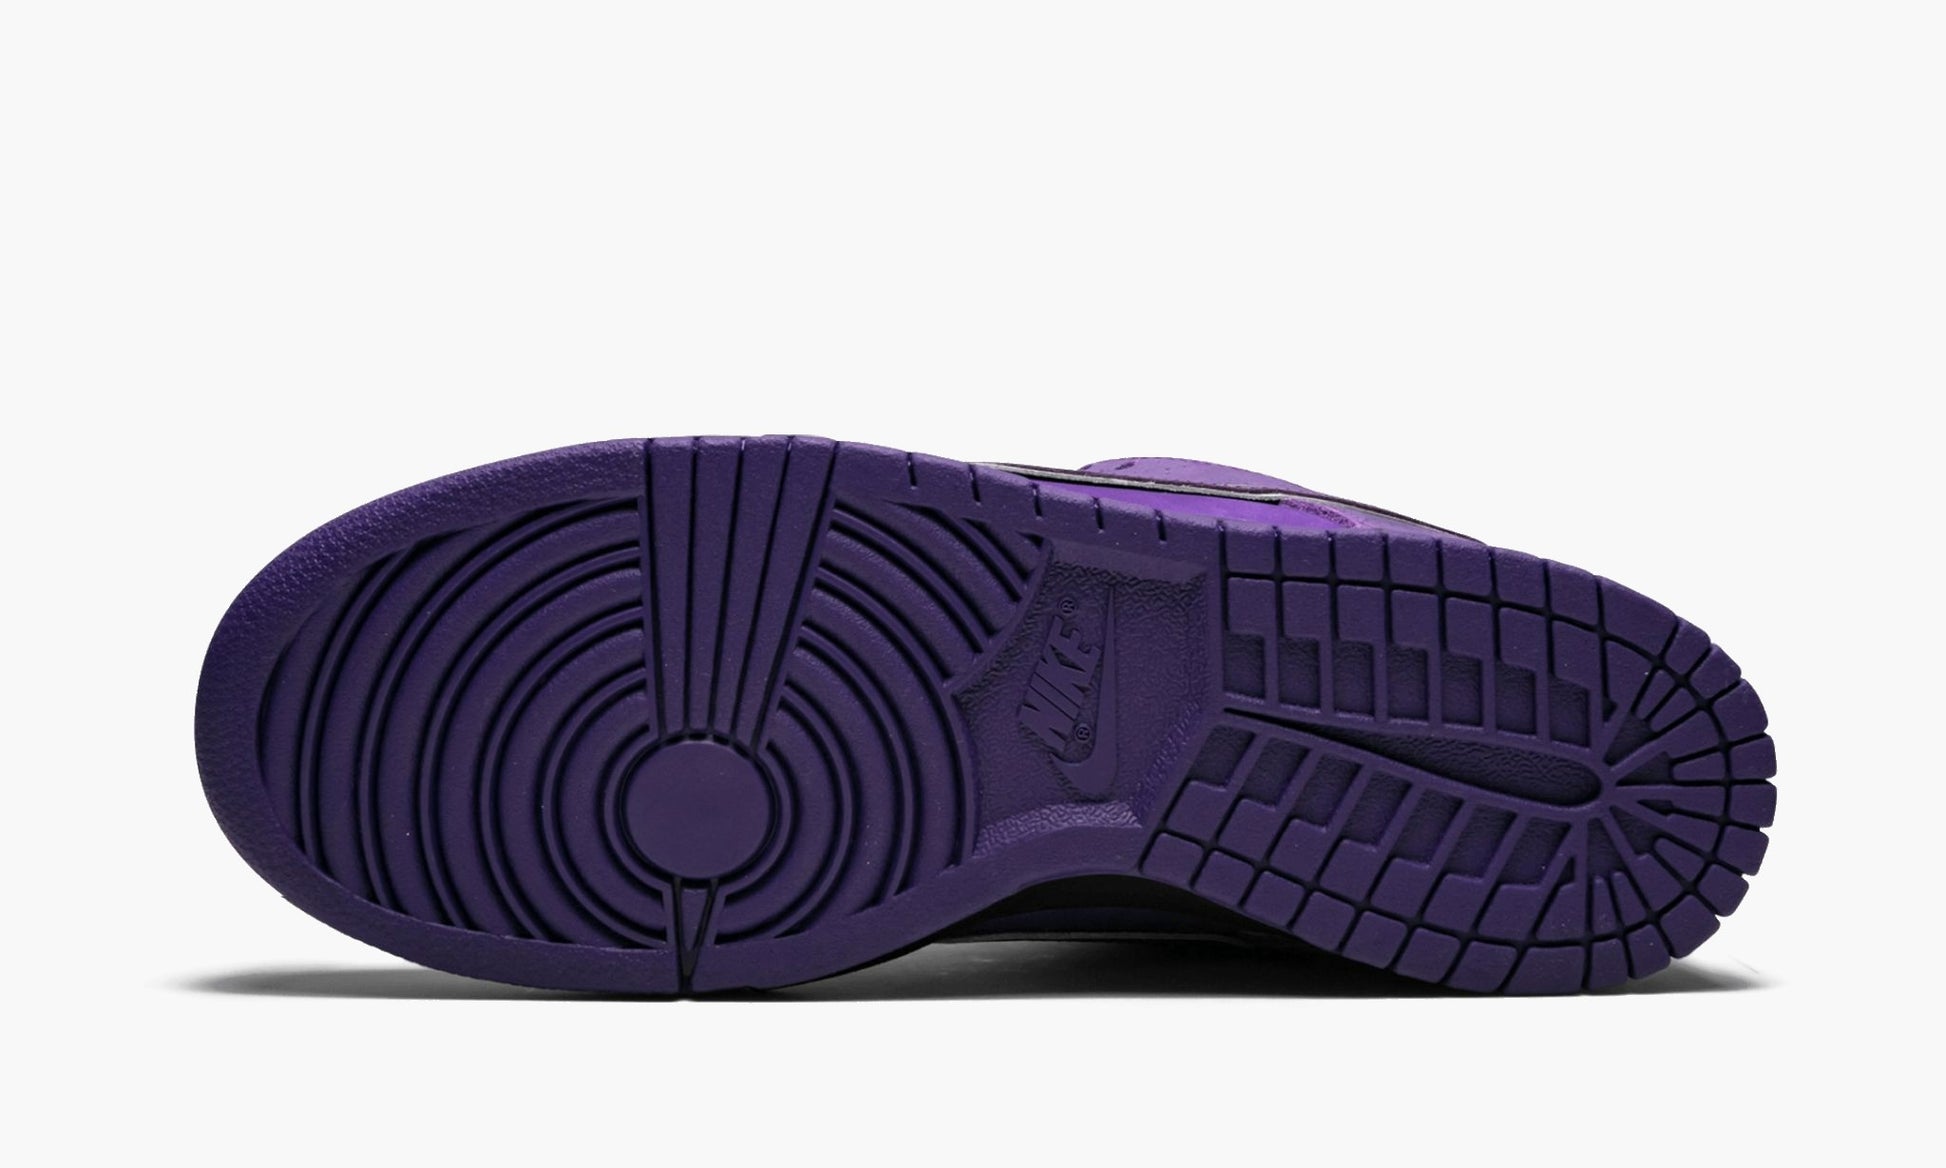 SB Dunk Low Concepts Purple Lobster - BV1310 555 | The Sortage